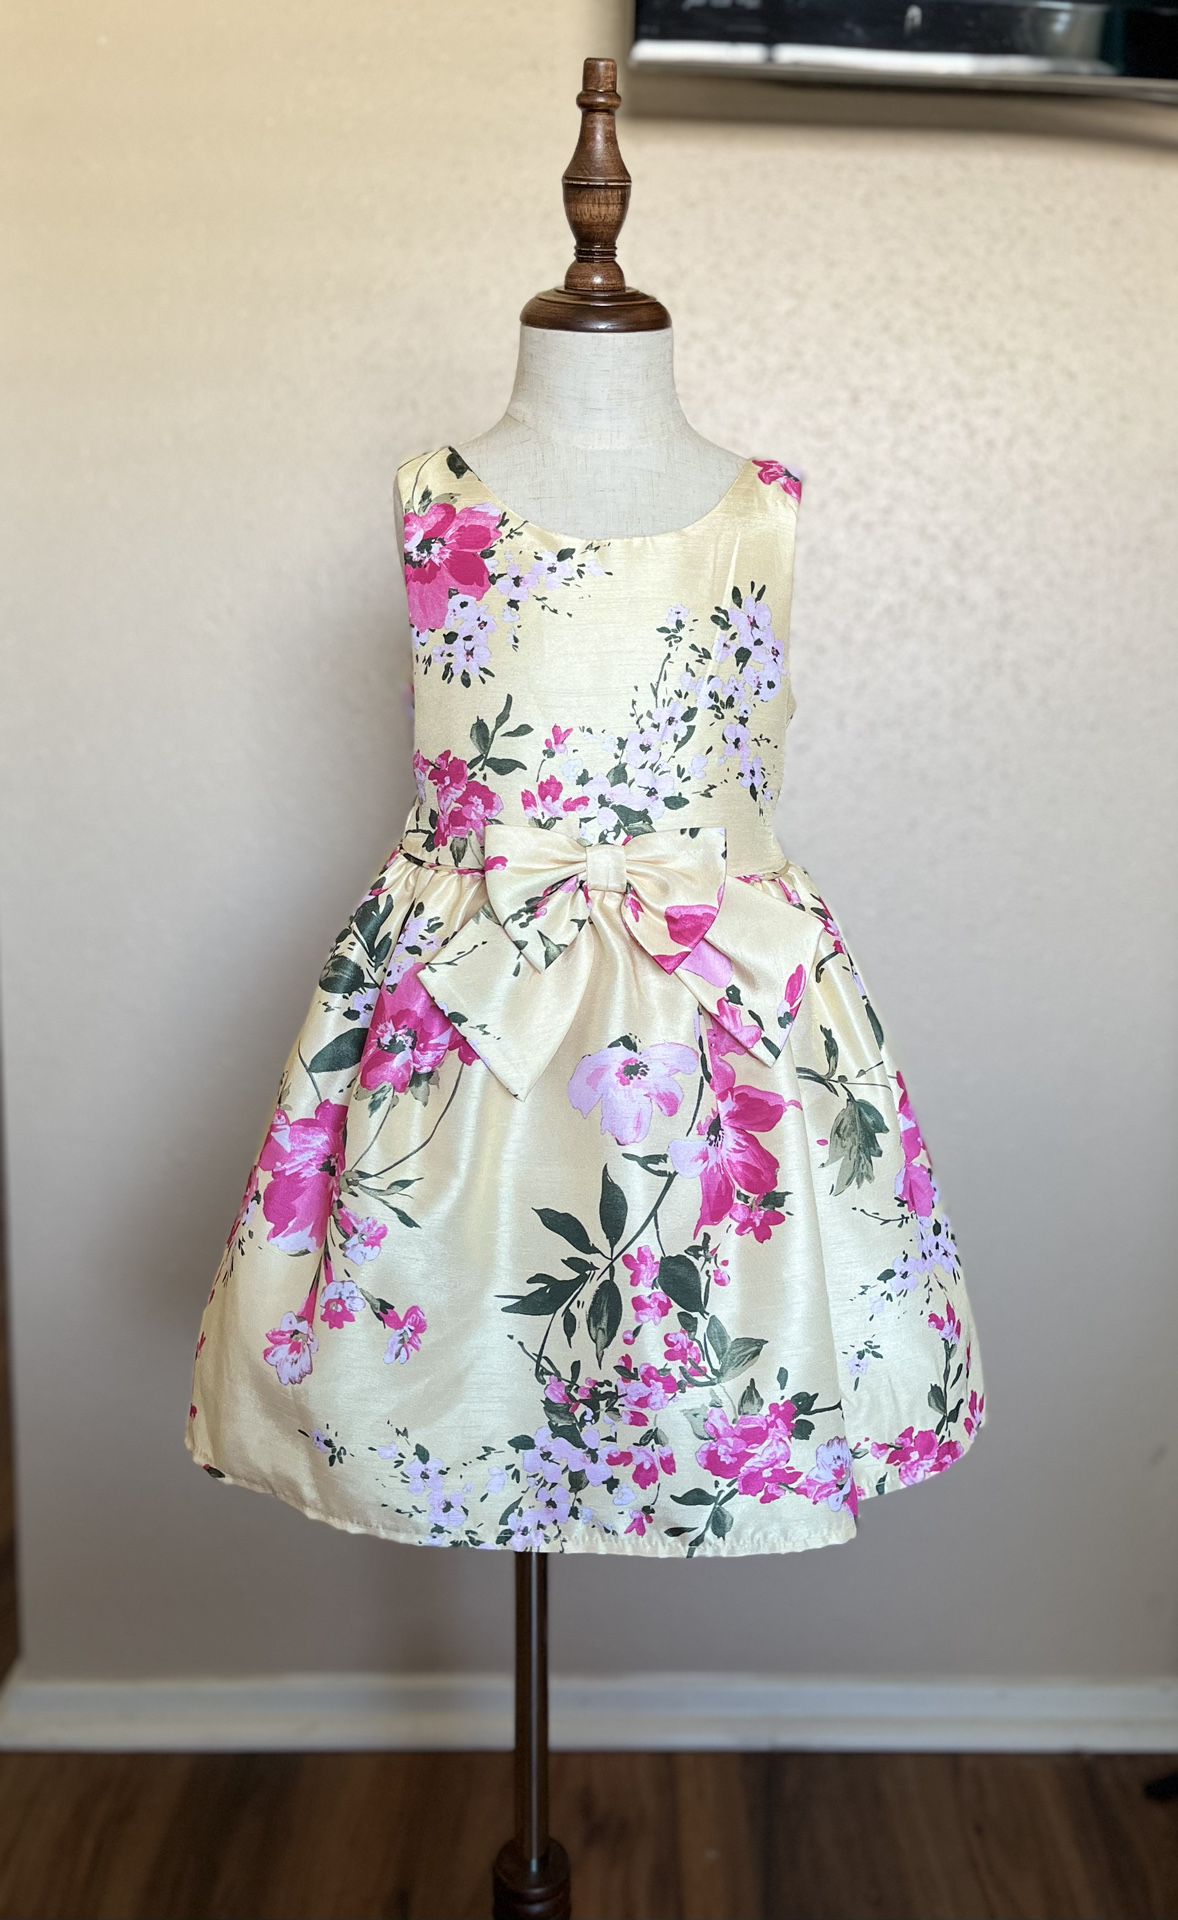 Girls Light Yellow Spring Easter Dress With Flowers Size 4T